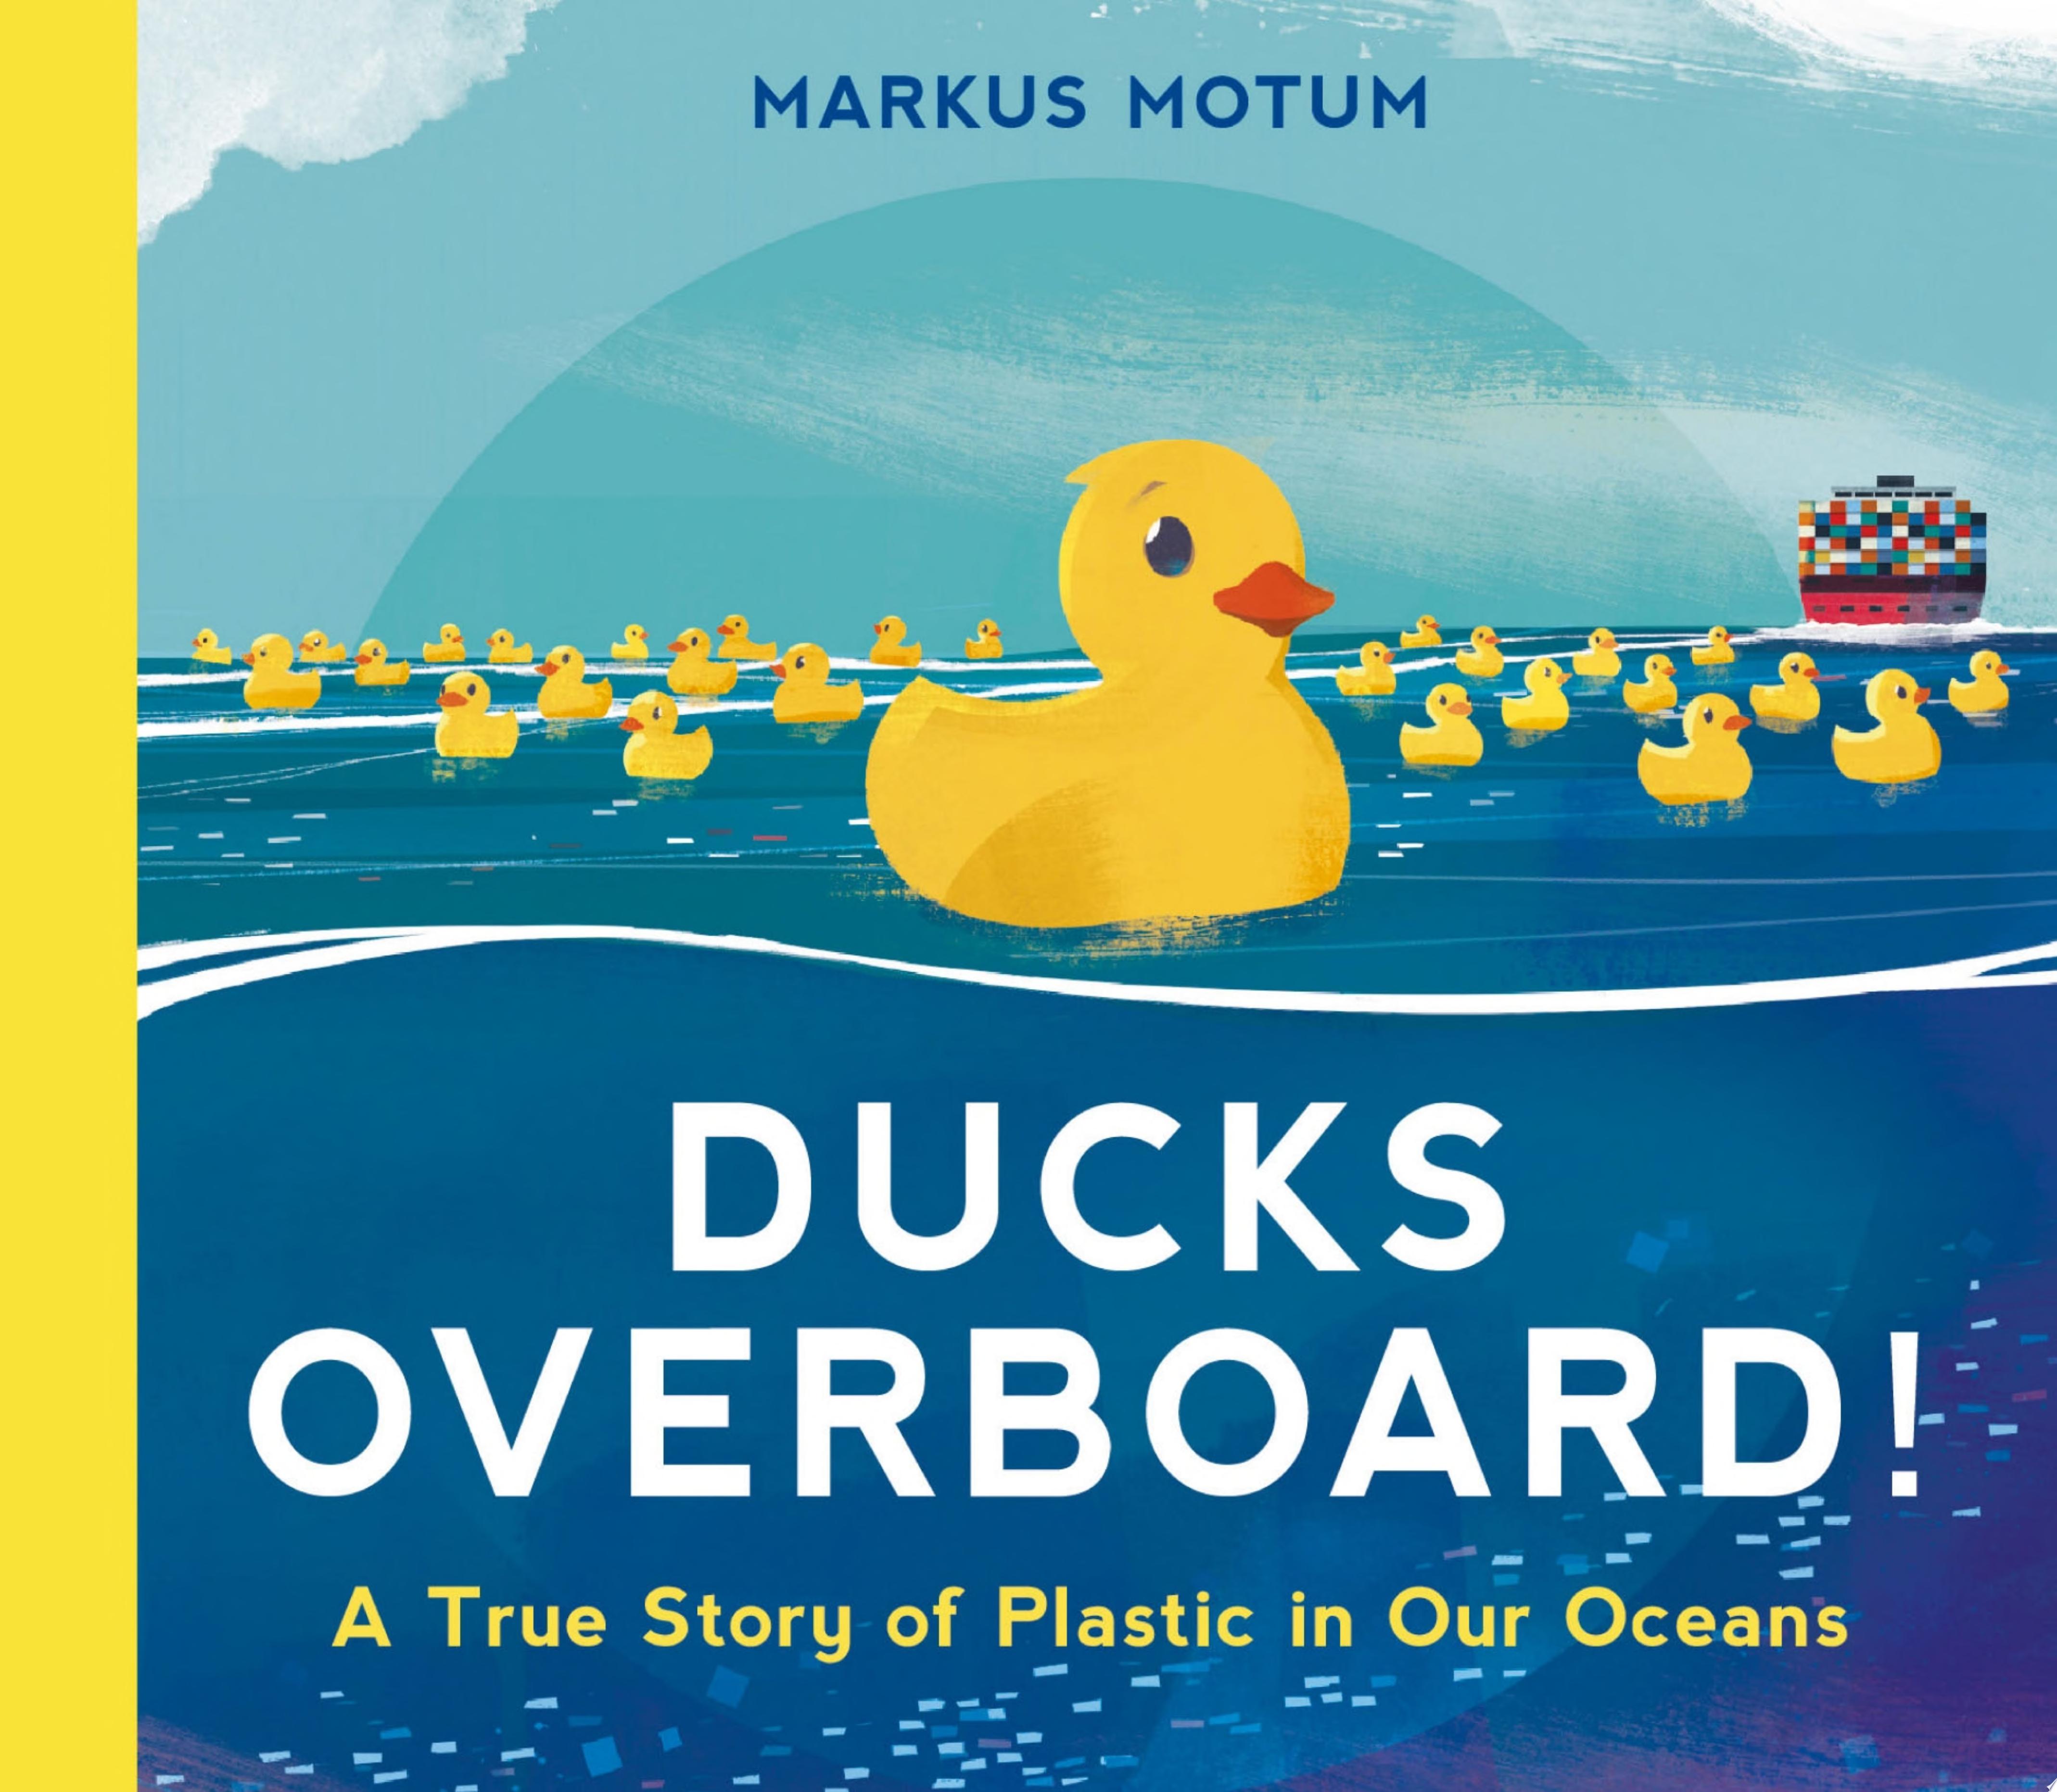 Image for "Ducks Overboard!: A True Story of Plastic in Our Oceans"